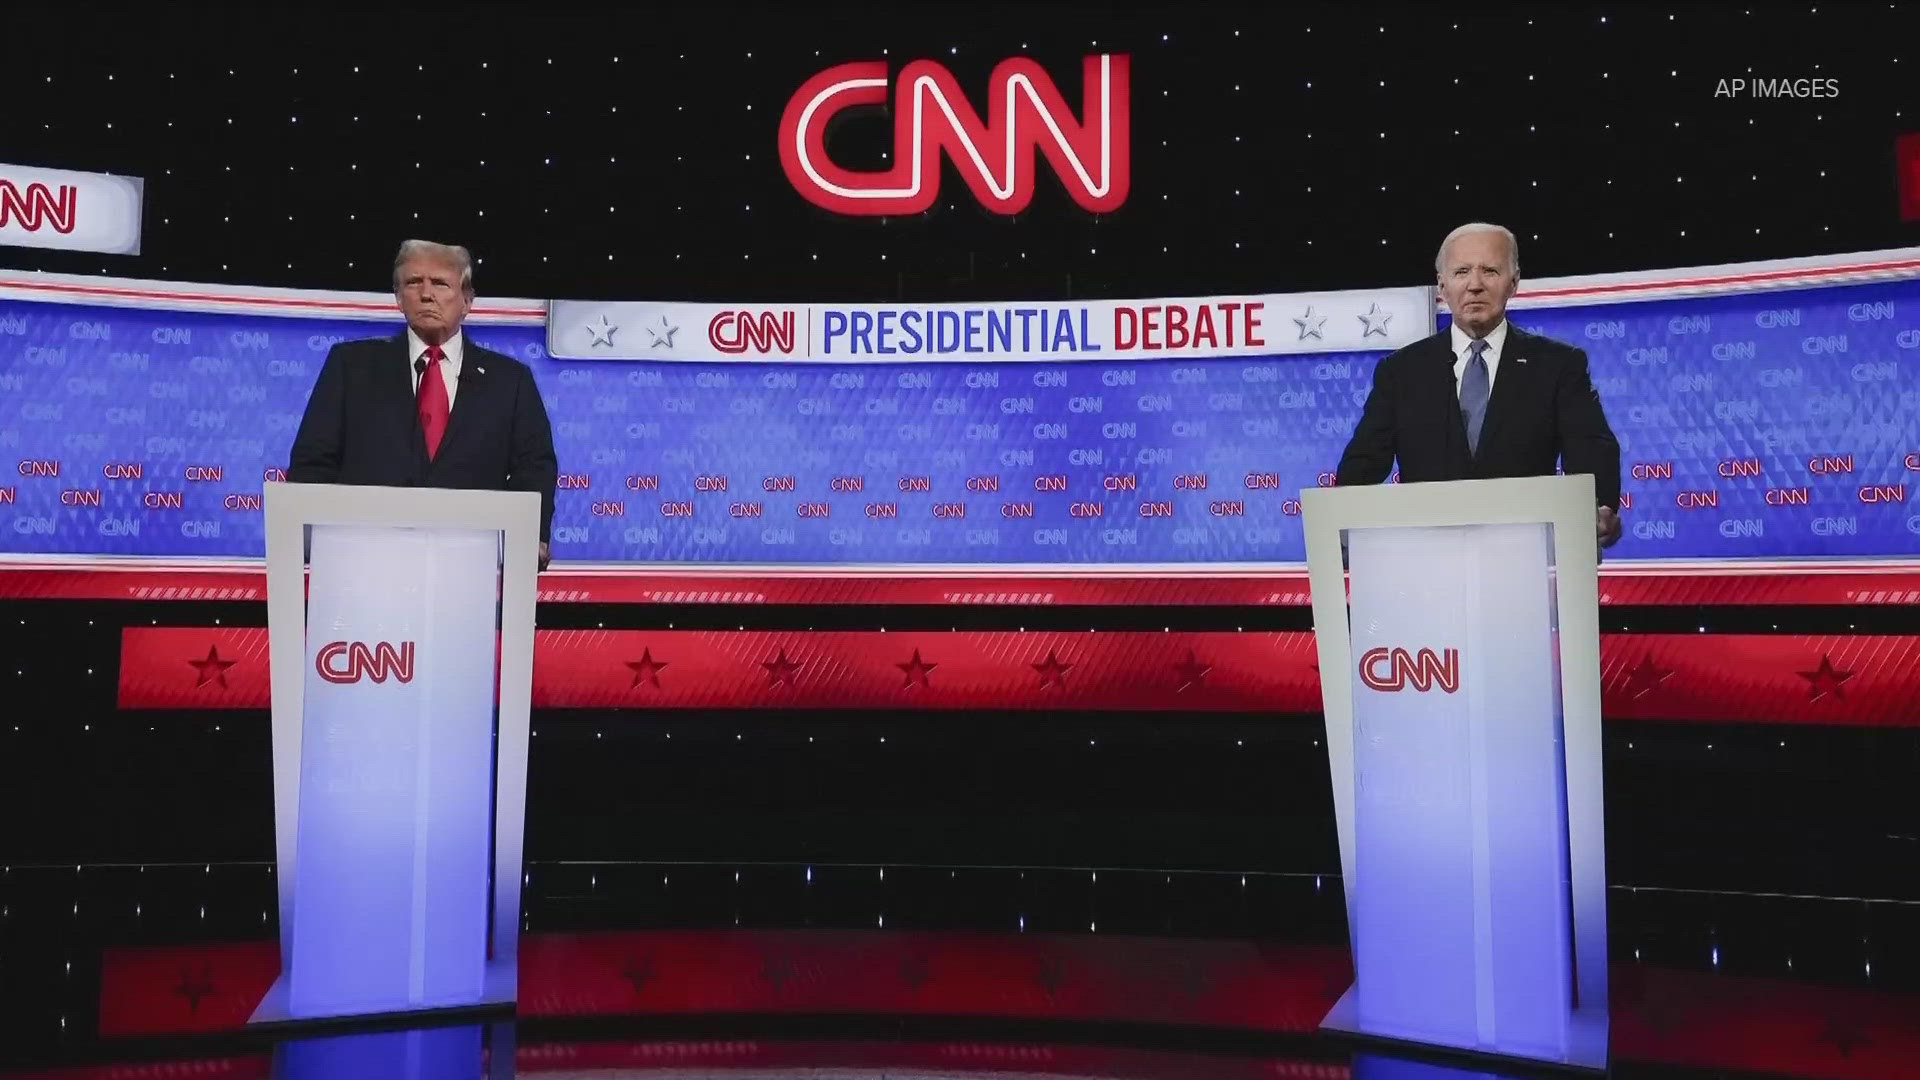 Biden is holding the call with Democratic governors to discuss his performance in the presidential debate.